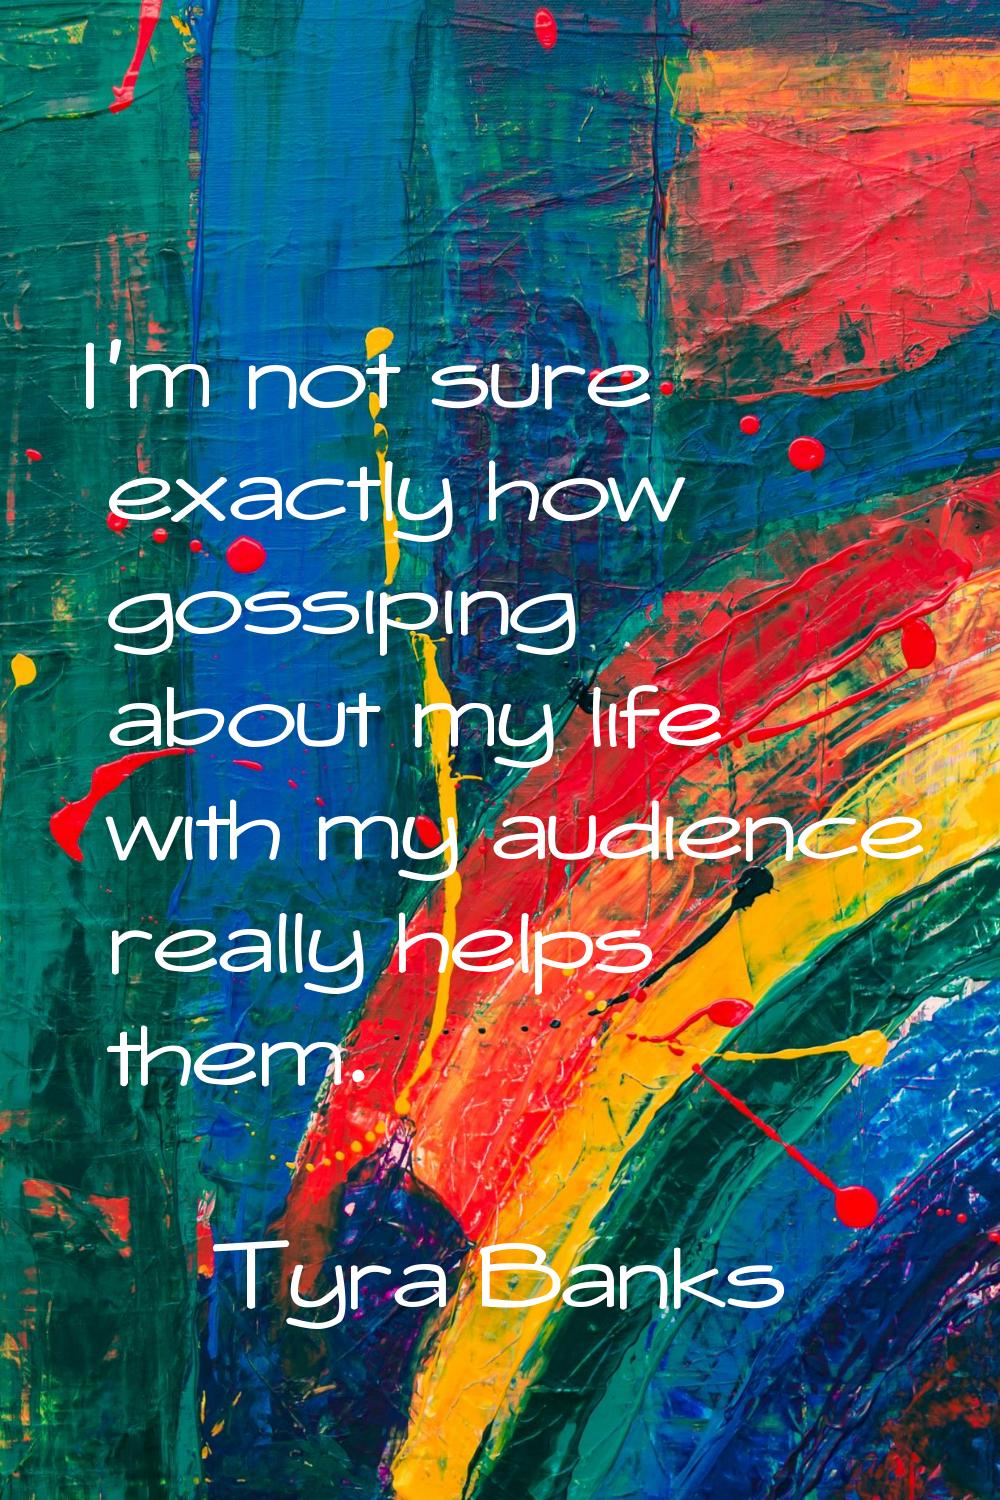 I'm not sure exactly how gossiping about my life with my audience really helps them.